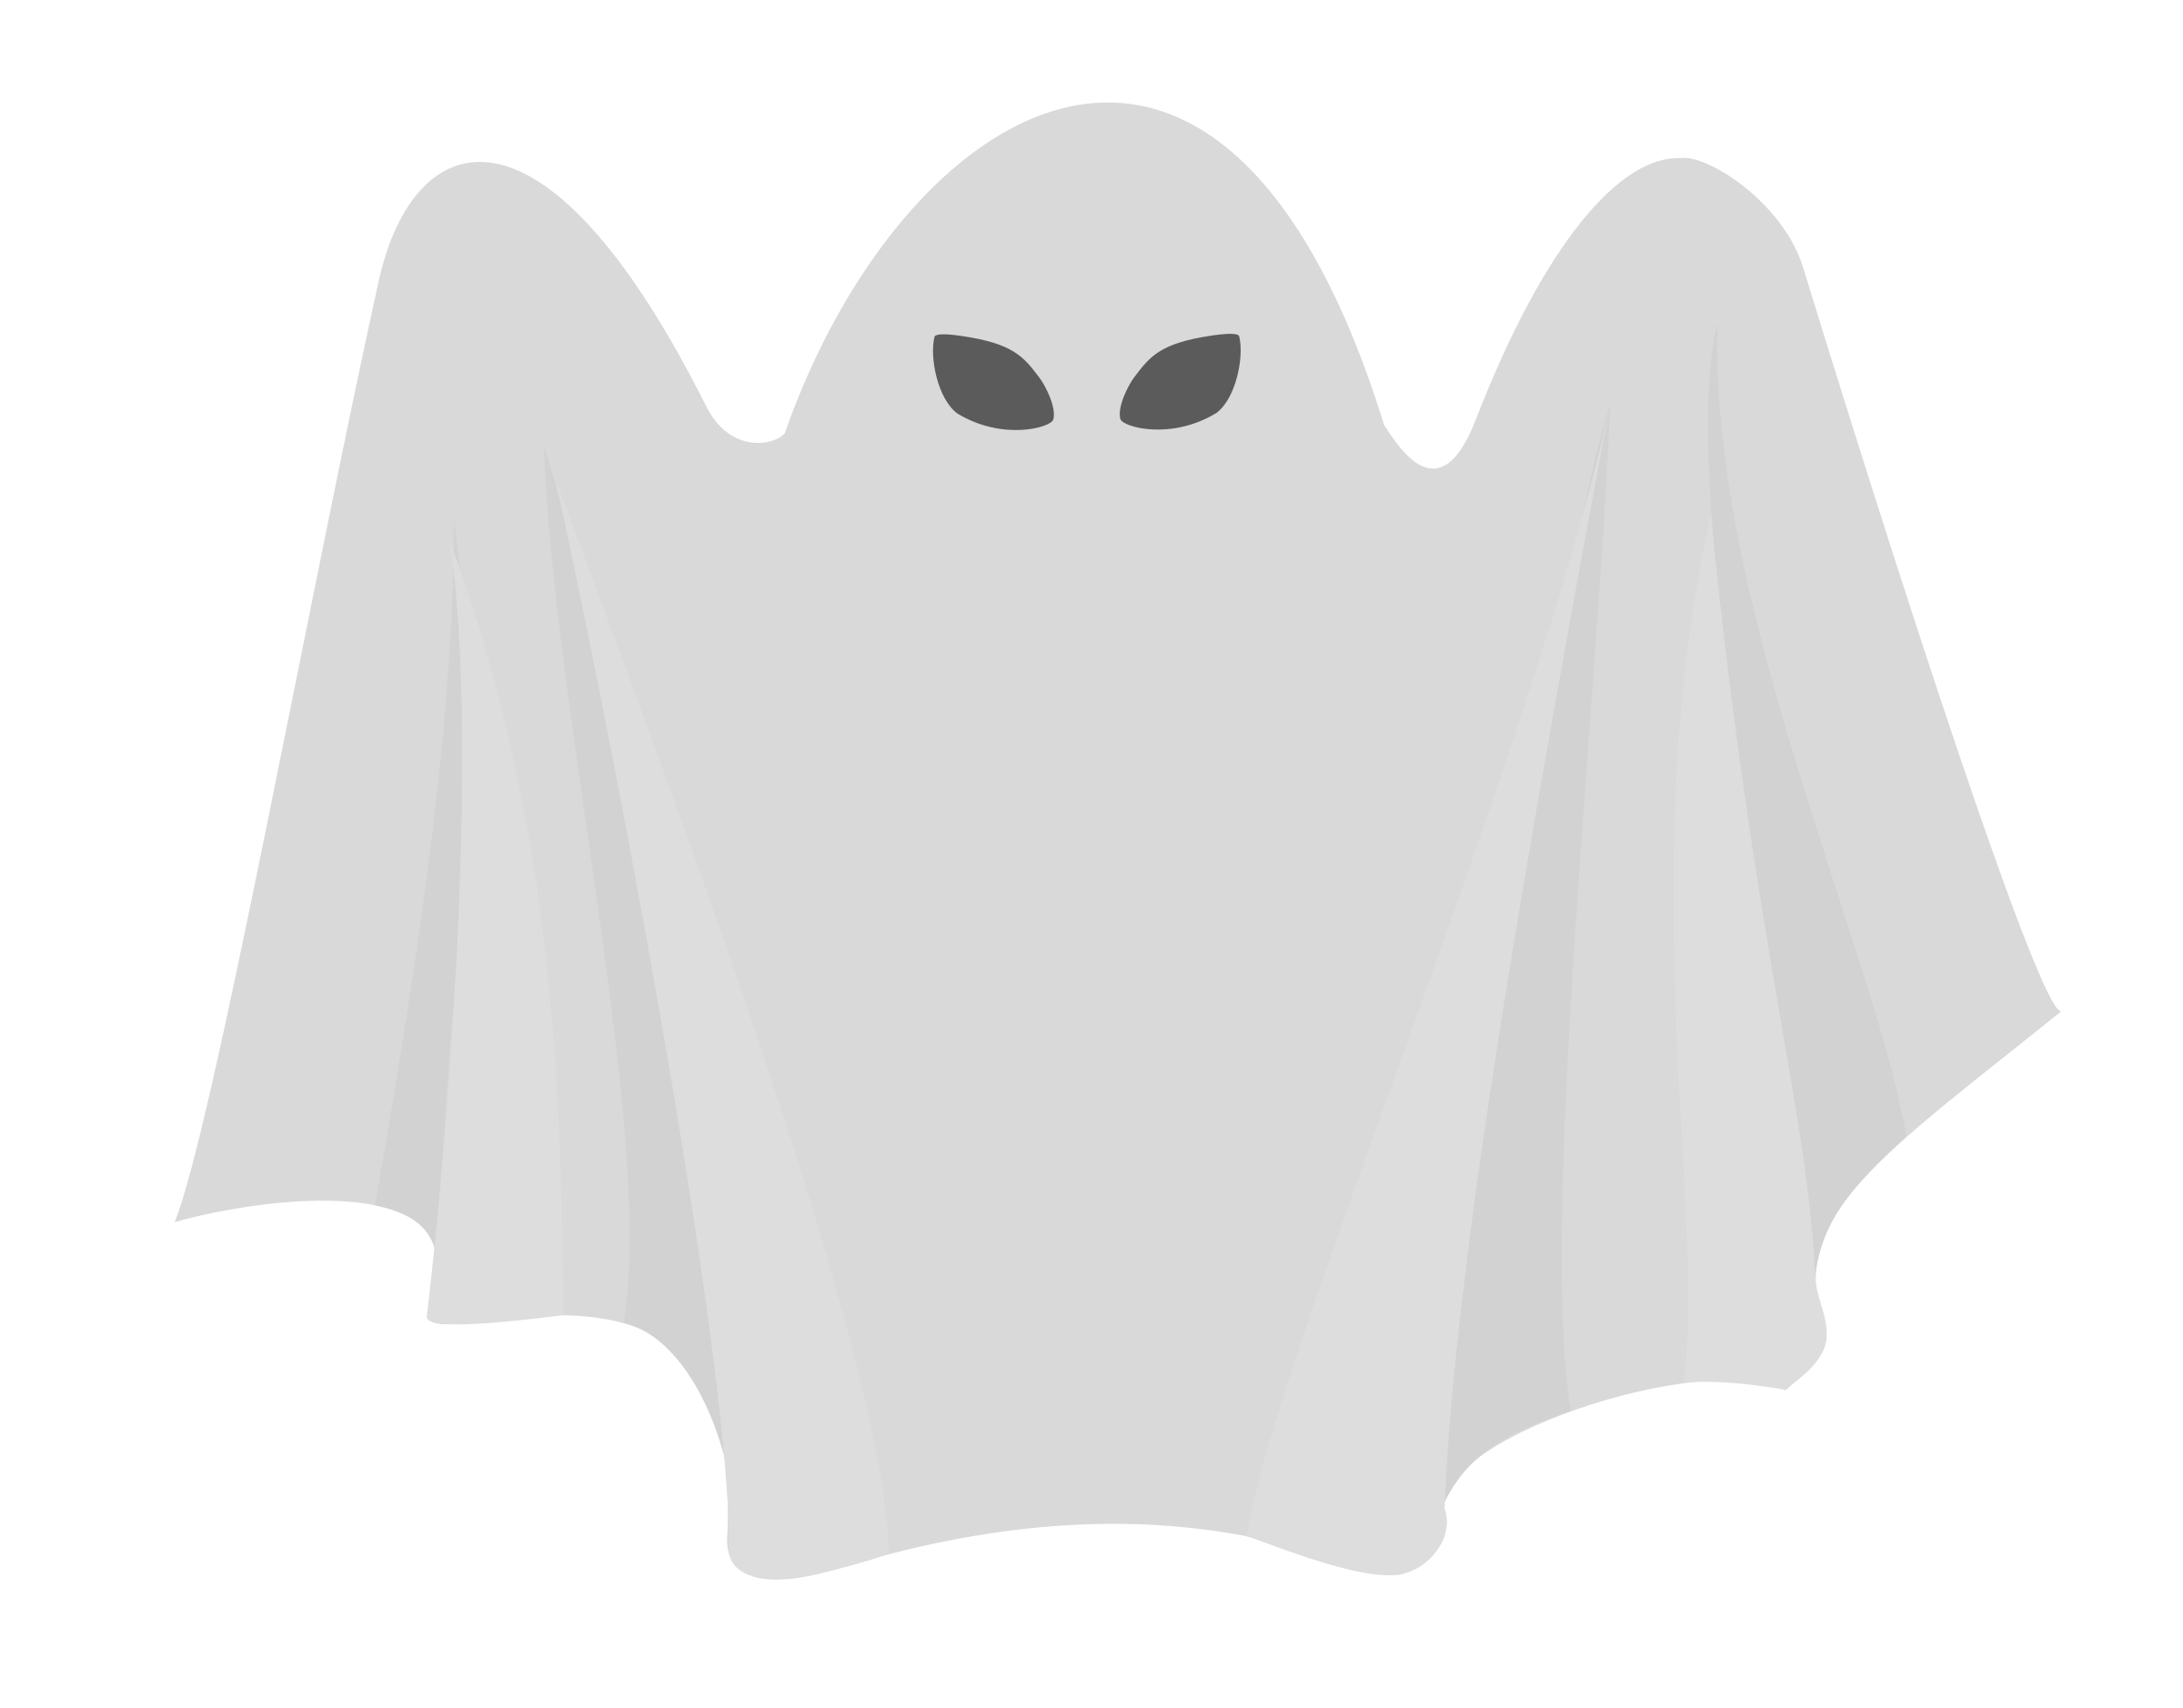 Fantasma fant me icons. Clipart ghost white lady ghost